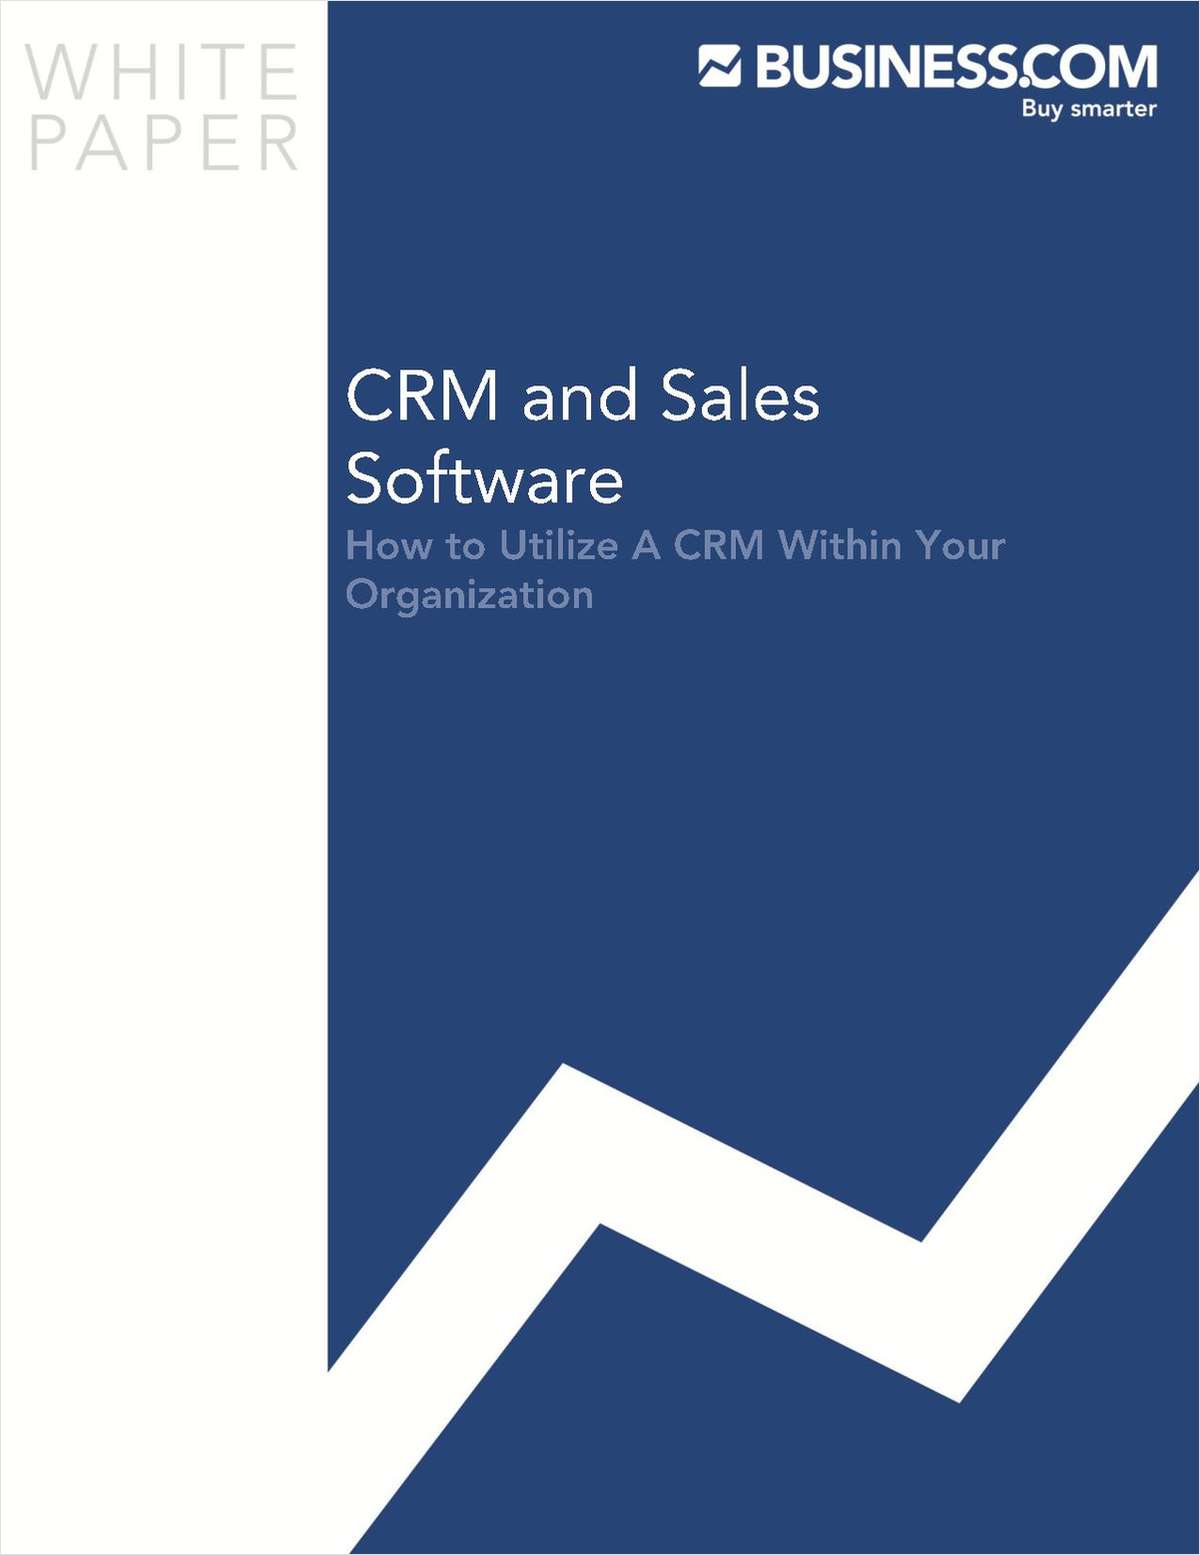 How to Utilize a CRM Within Your Organization